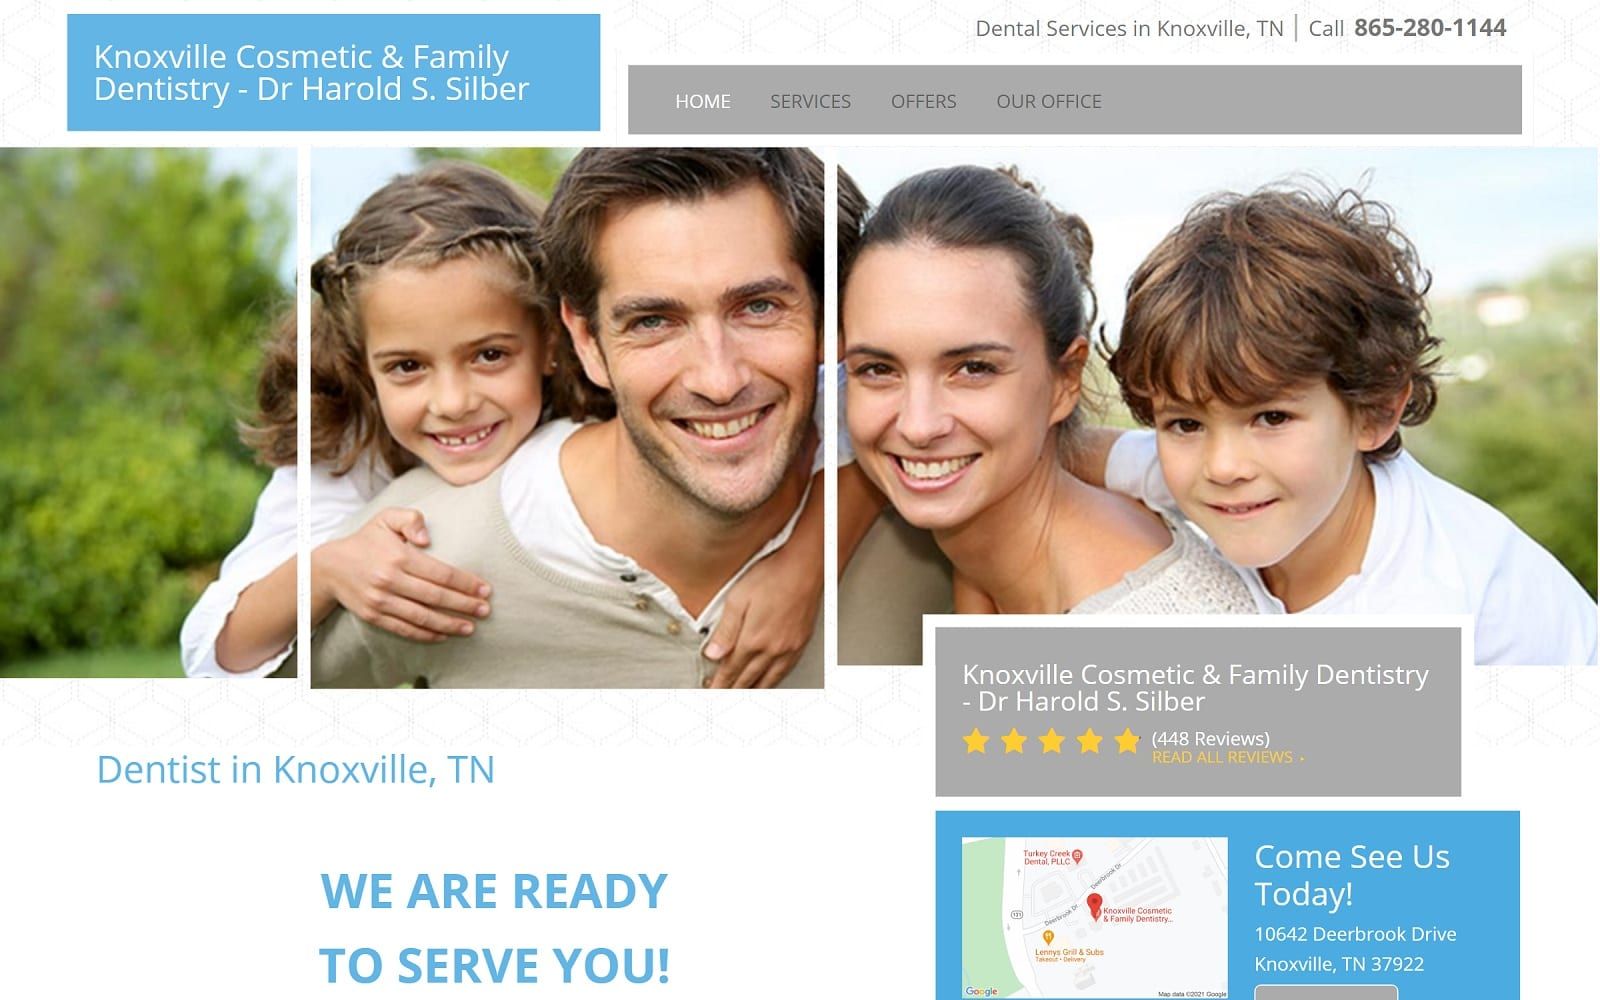 The Screenshot of Knoxville Cosmetic & Family Dentistry - Dr Harold S. Silber smilesknoxville.com Website